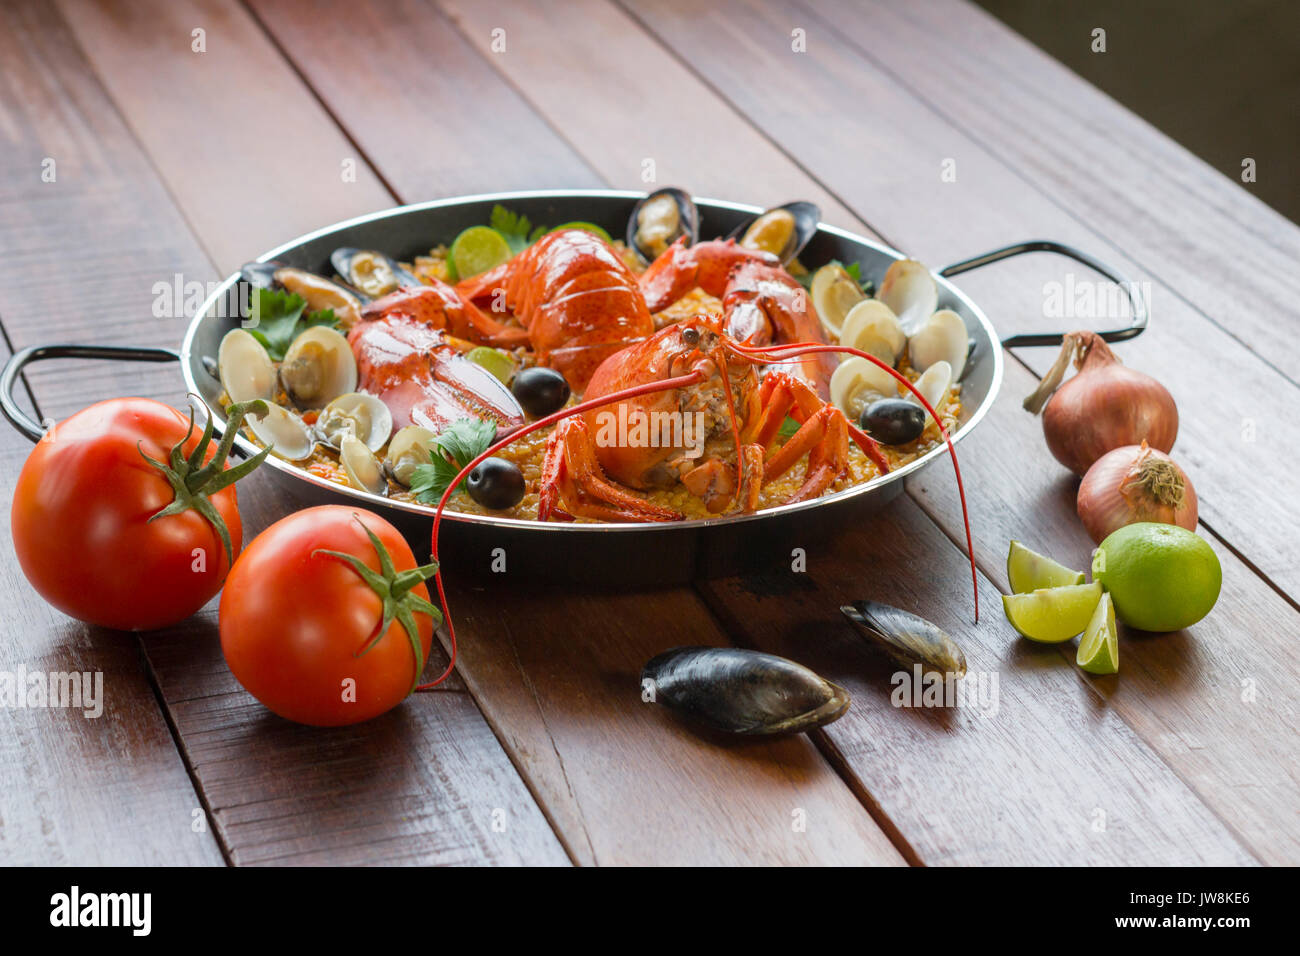 Gourmet seafood Valencia paella with fresh langoustine, clams, mussels and squid on savory saffron rice with peas and lemon slices, close up view Stock Photo